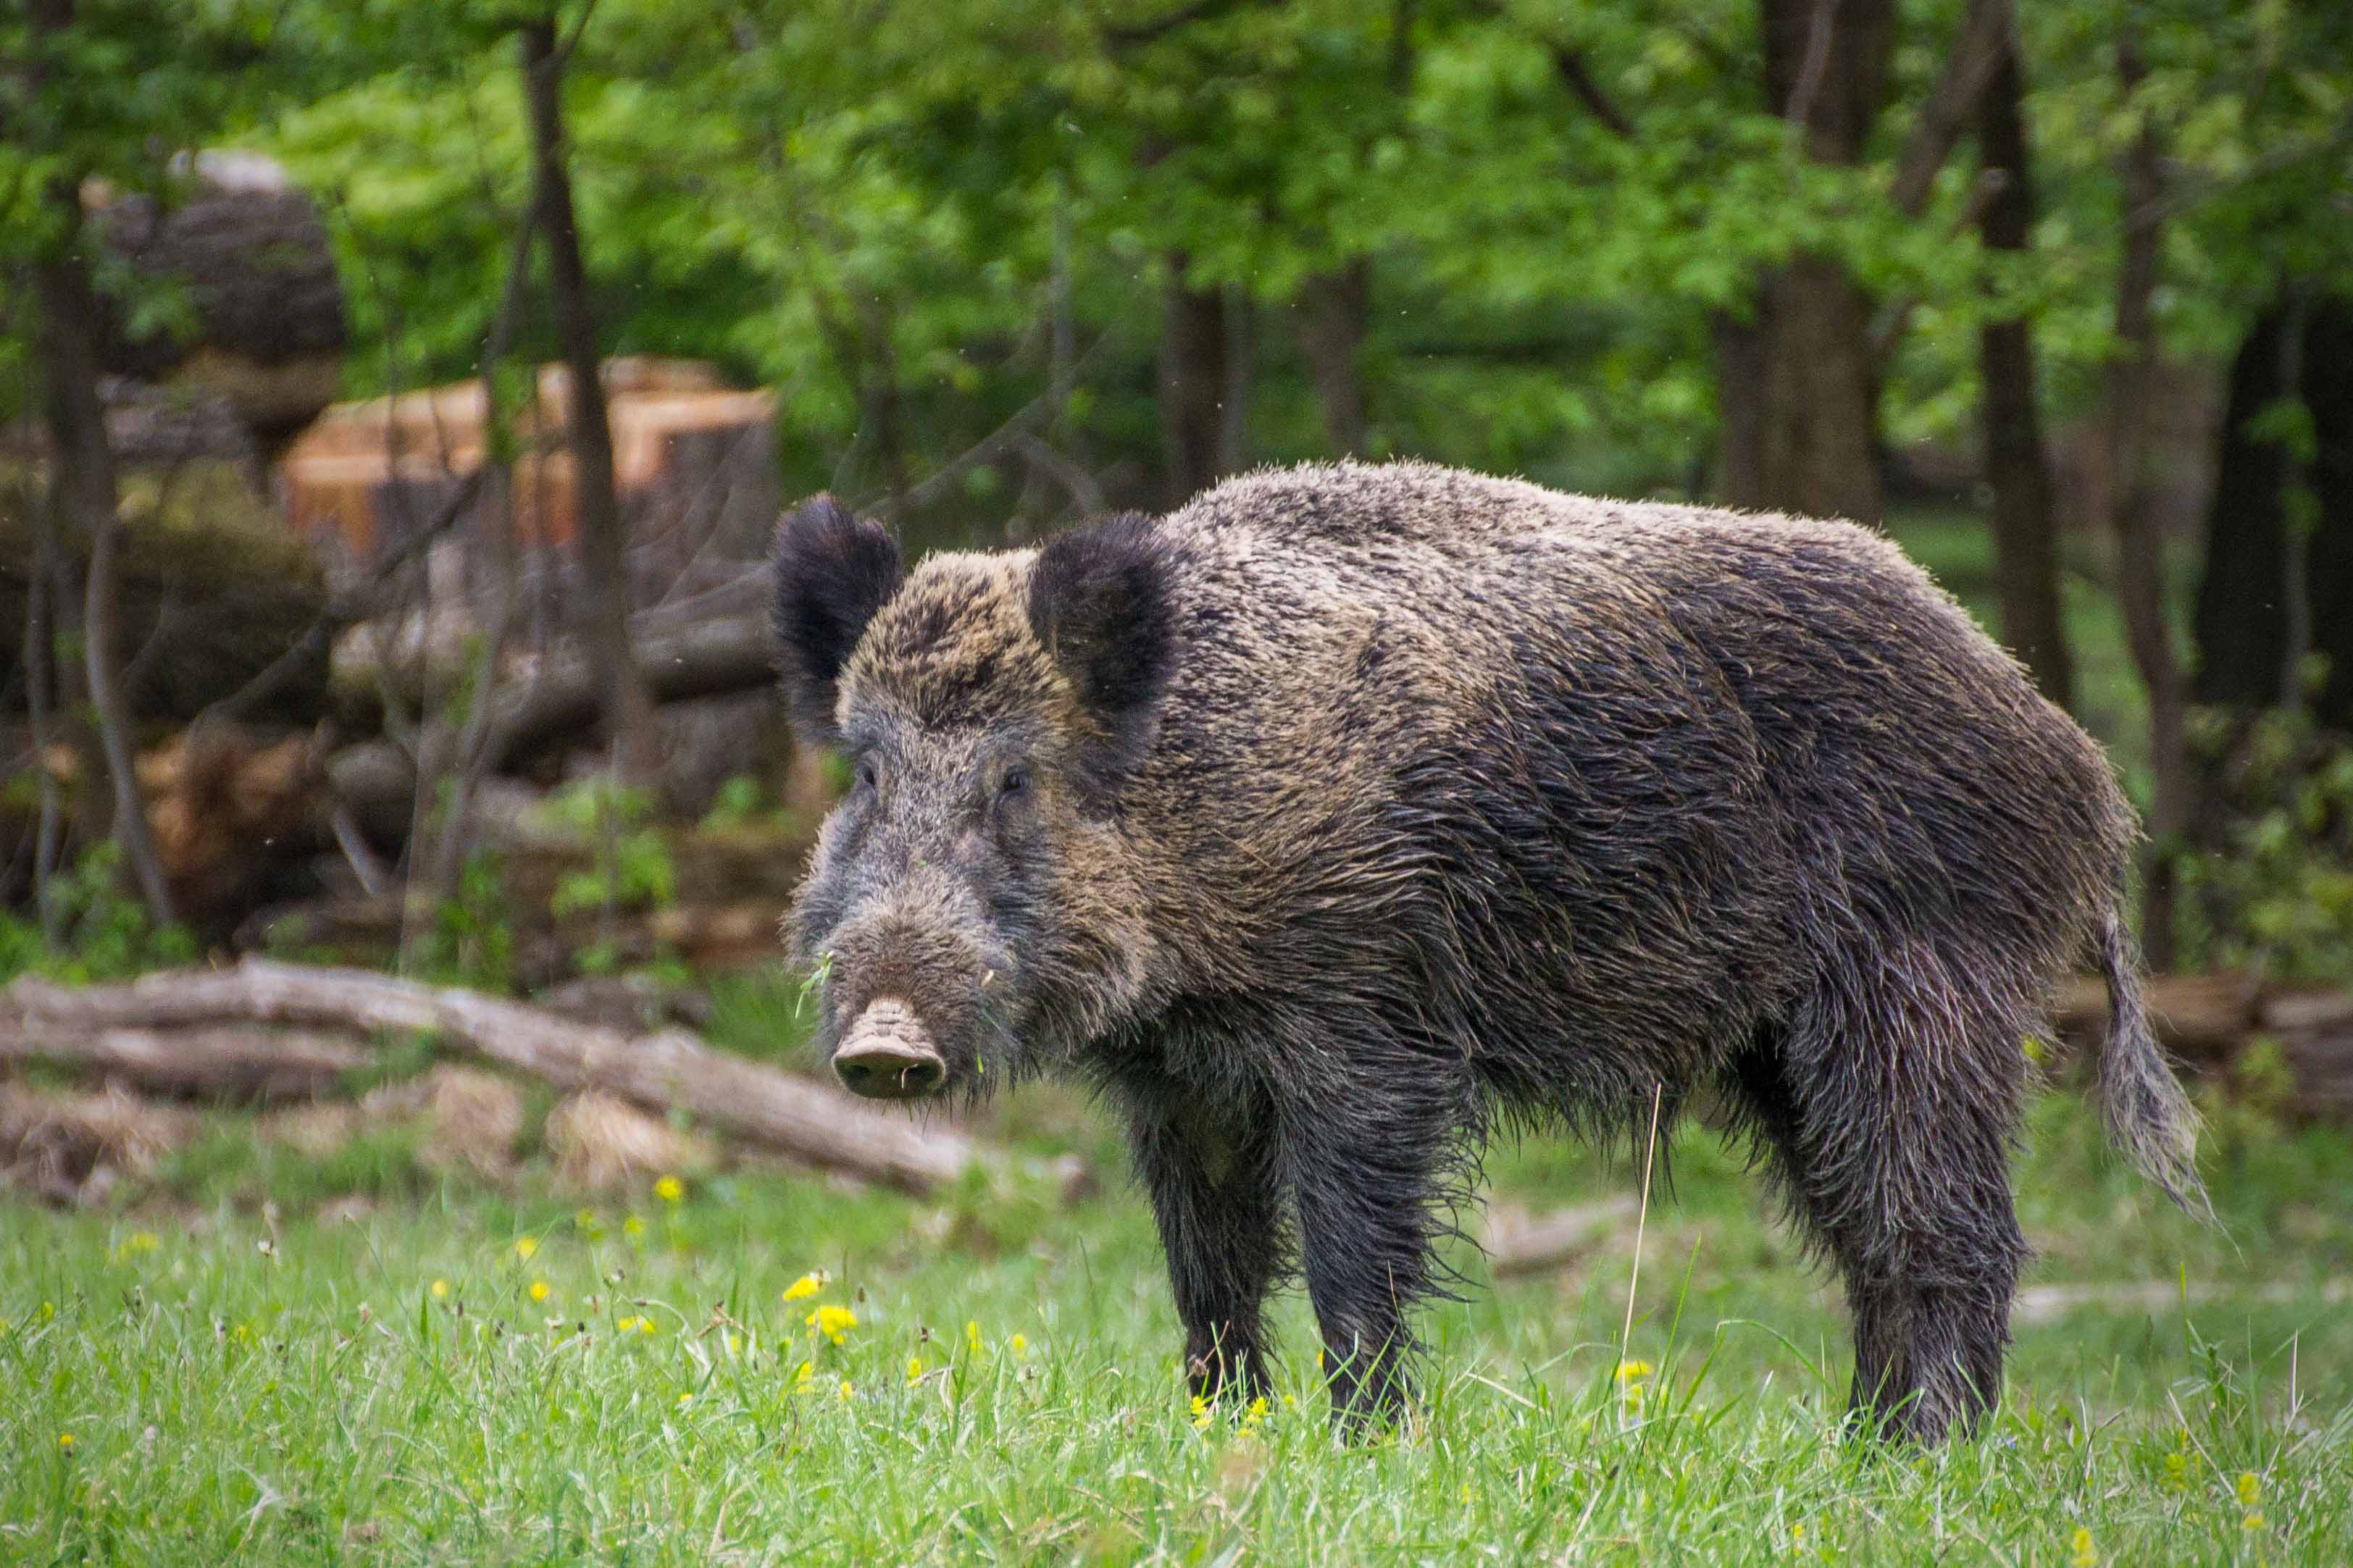 Wild pigs not as fun as the name suggests - The Bay 88.7FM #WeAreMuskoka